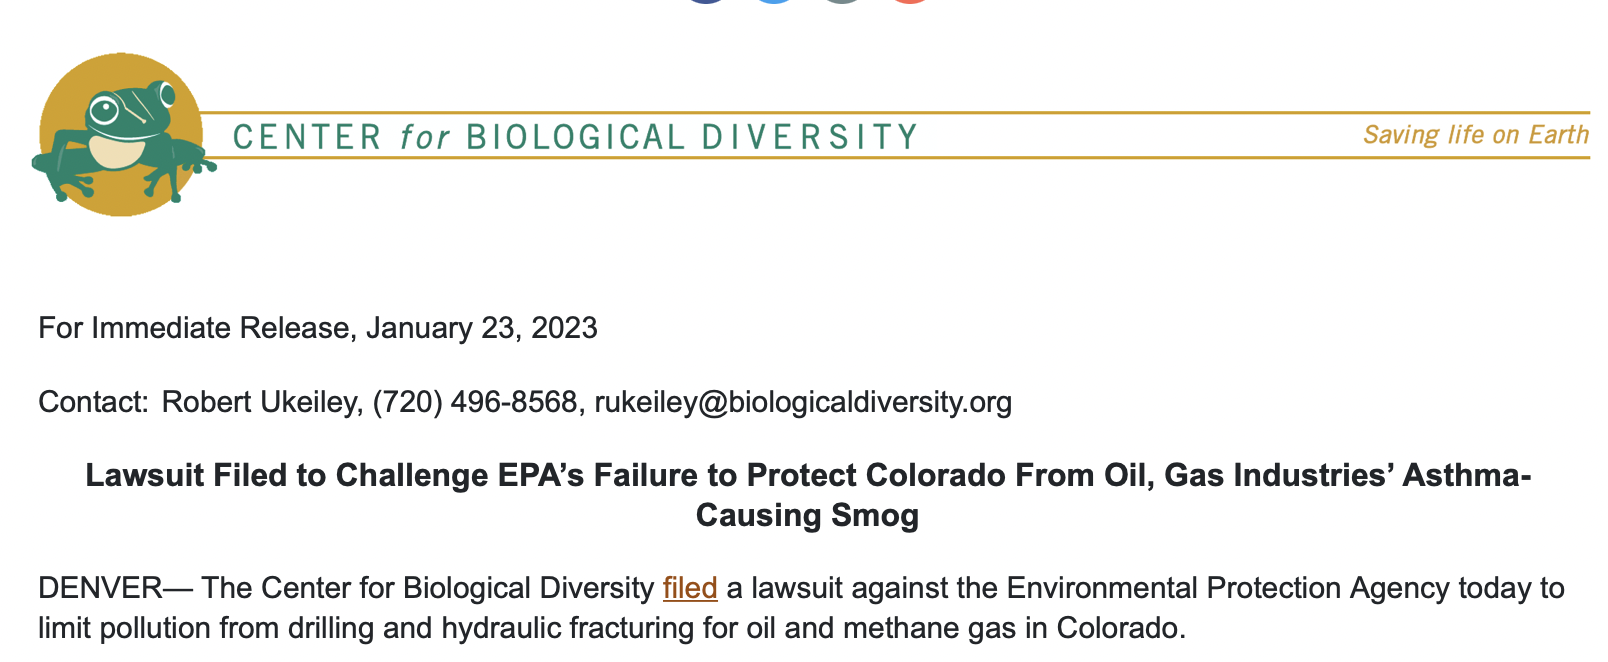 EPA Lawsuit Filed by Center for Biological Diversity